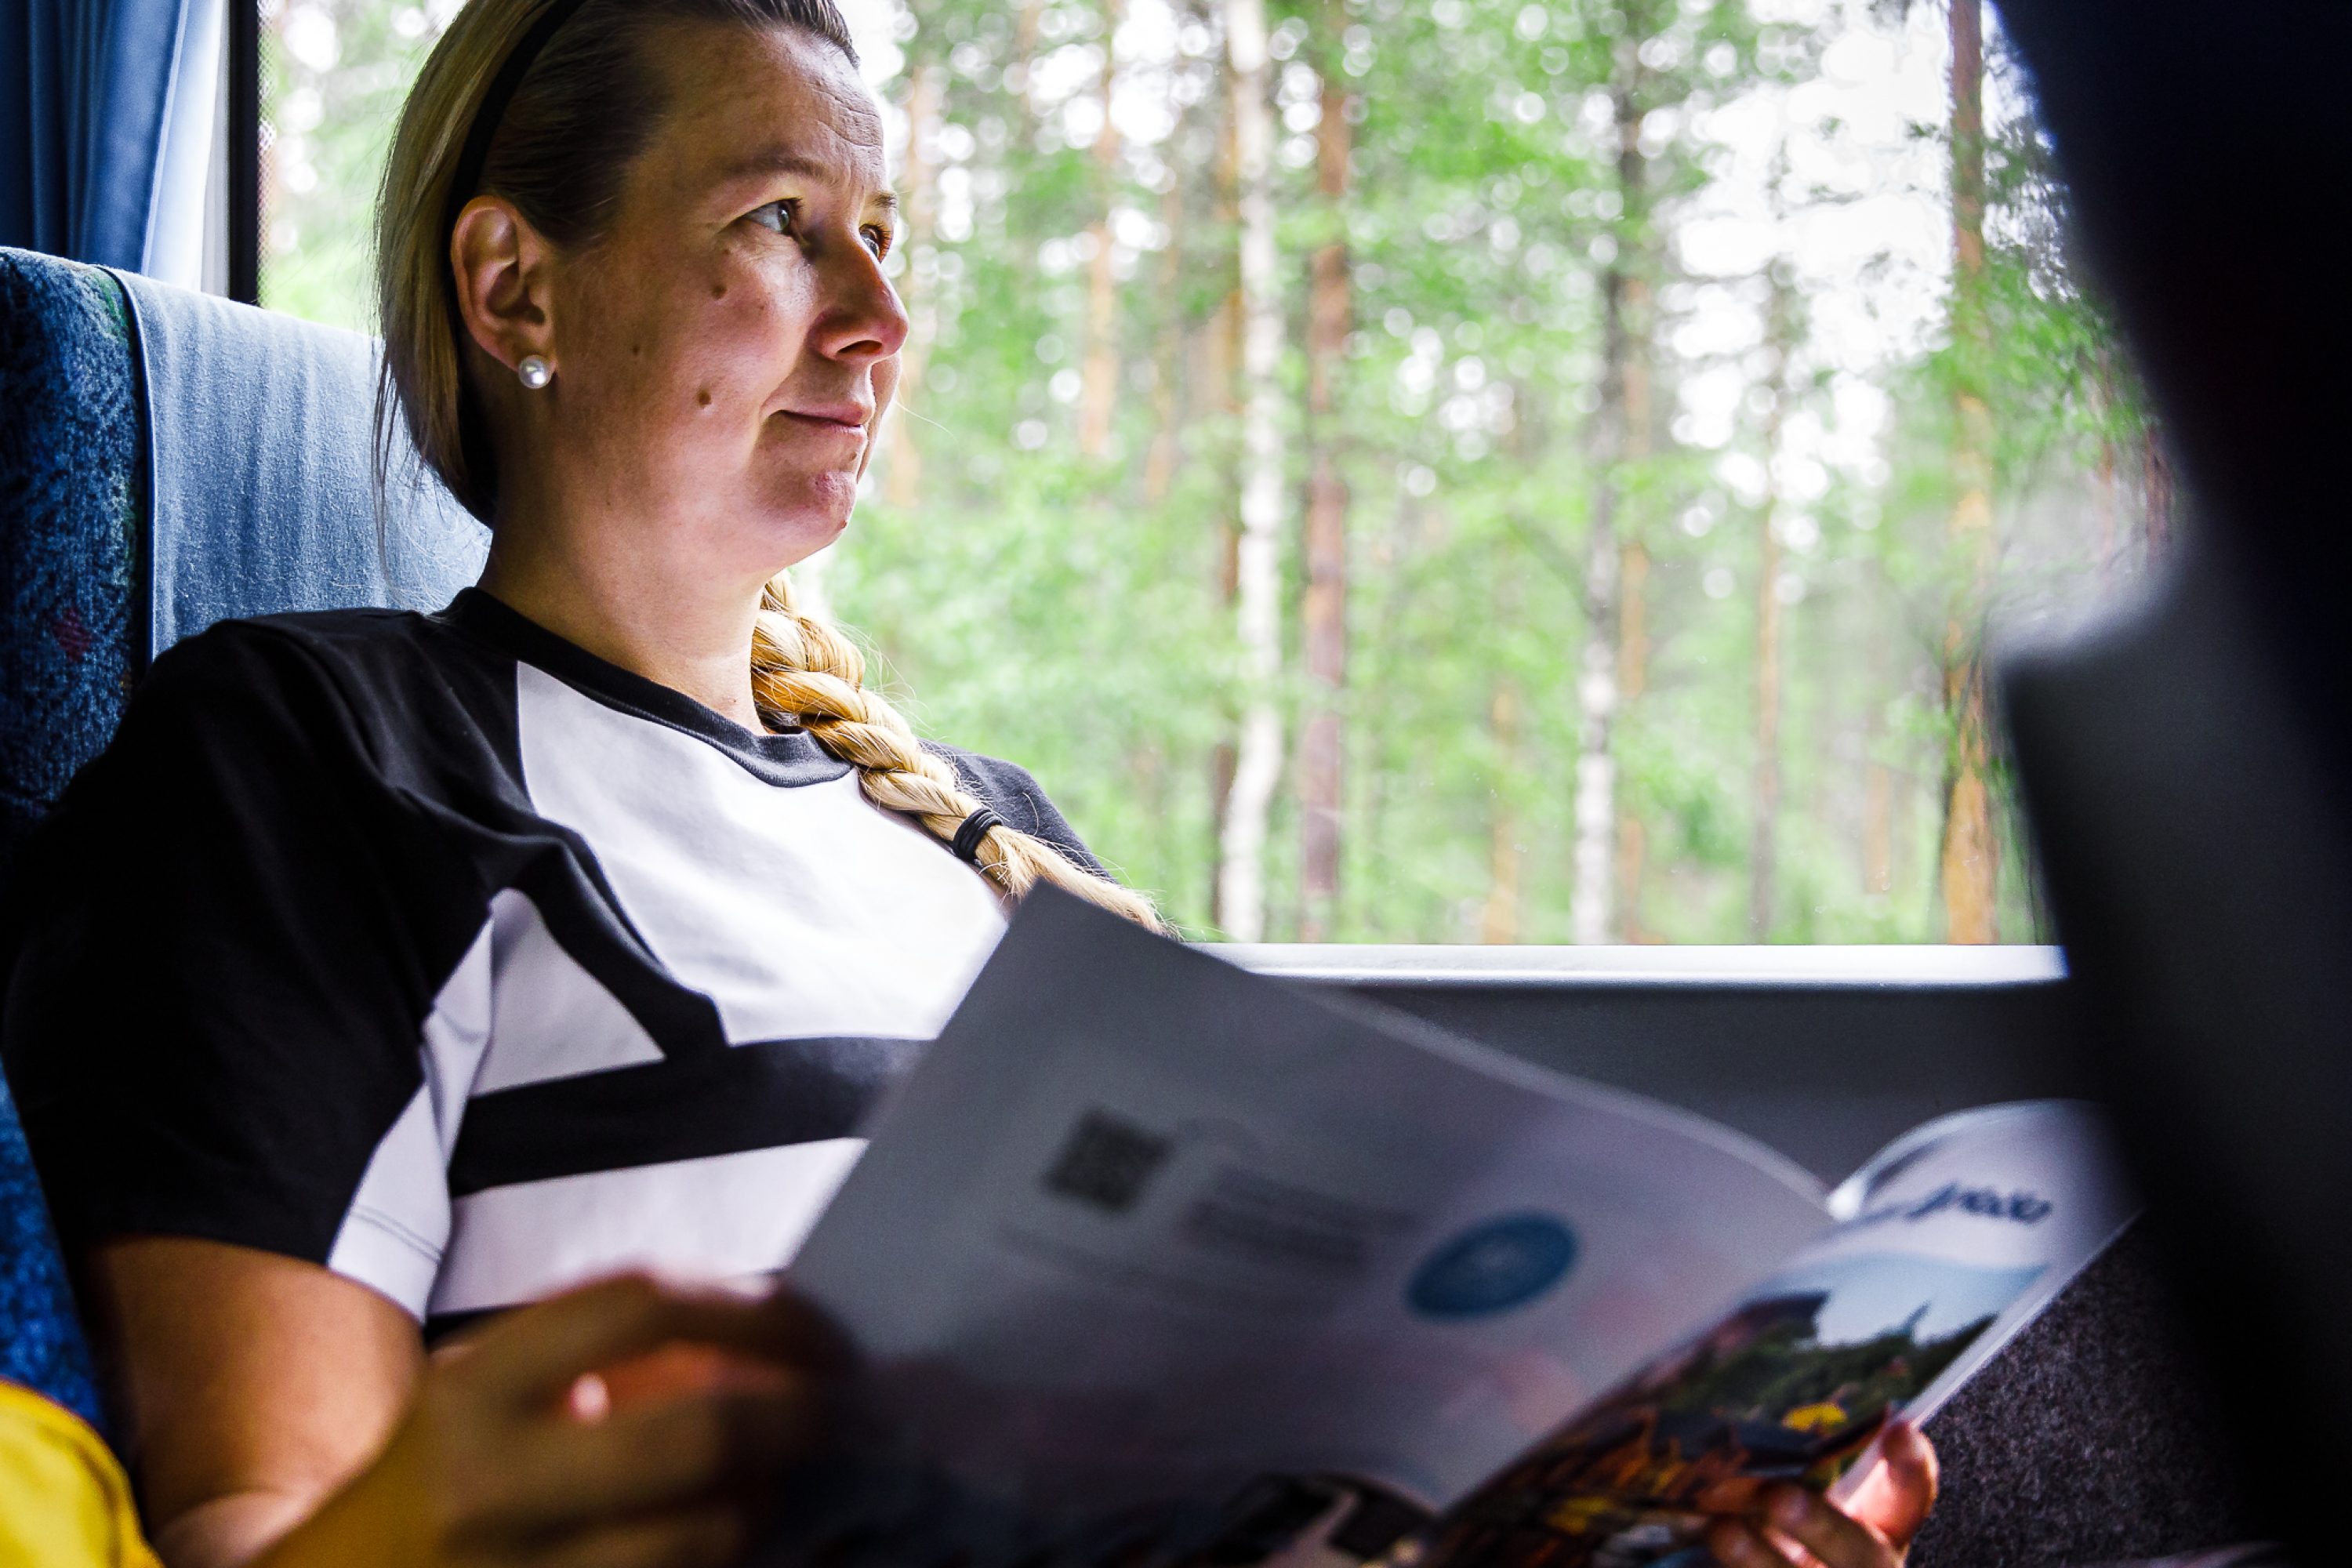 A woman sits in a bus and reads newspaper